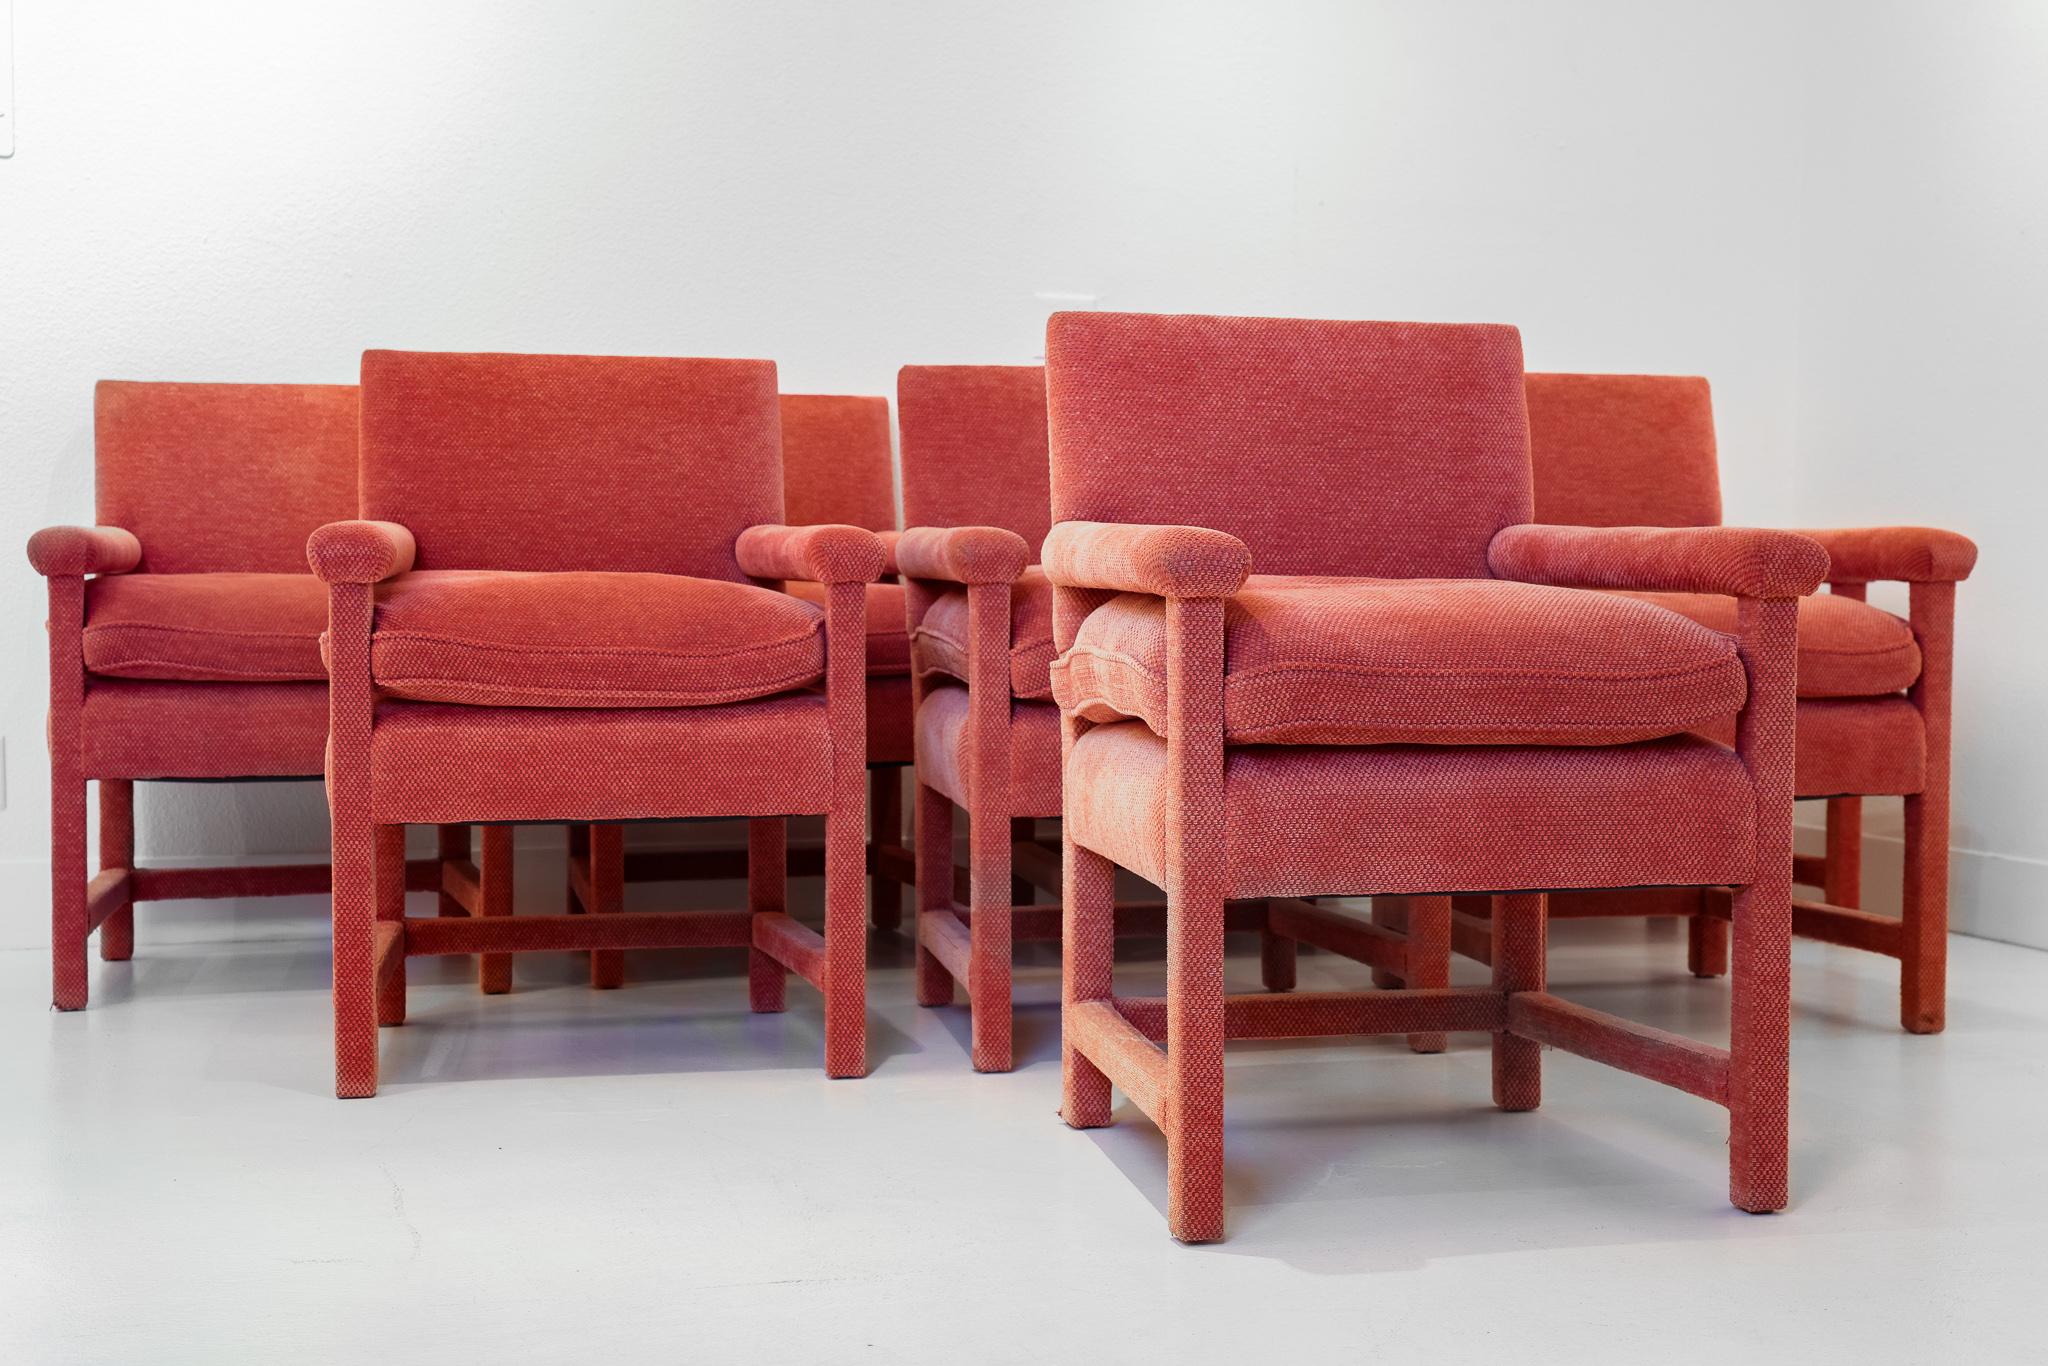 American Set of 8 Upholstered Dining Chairs from the Estate of James Garner